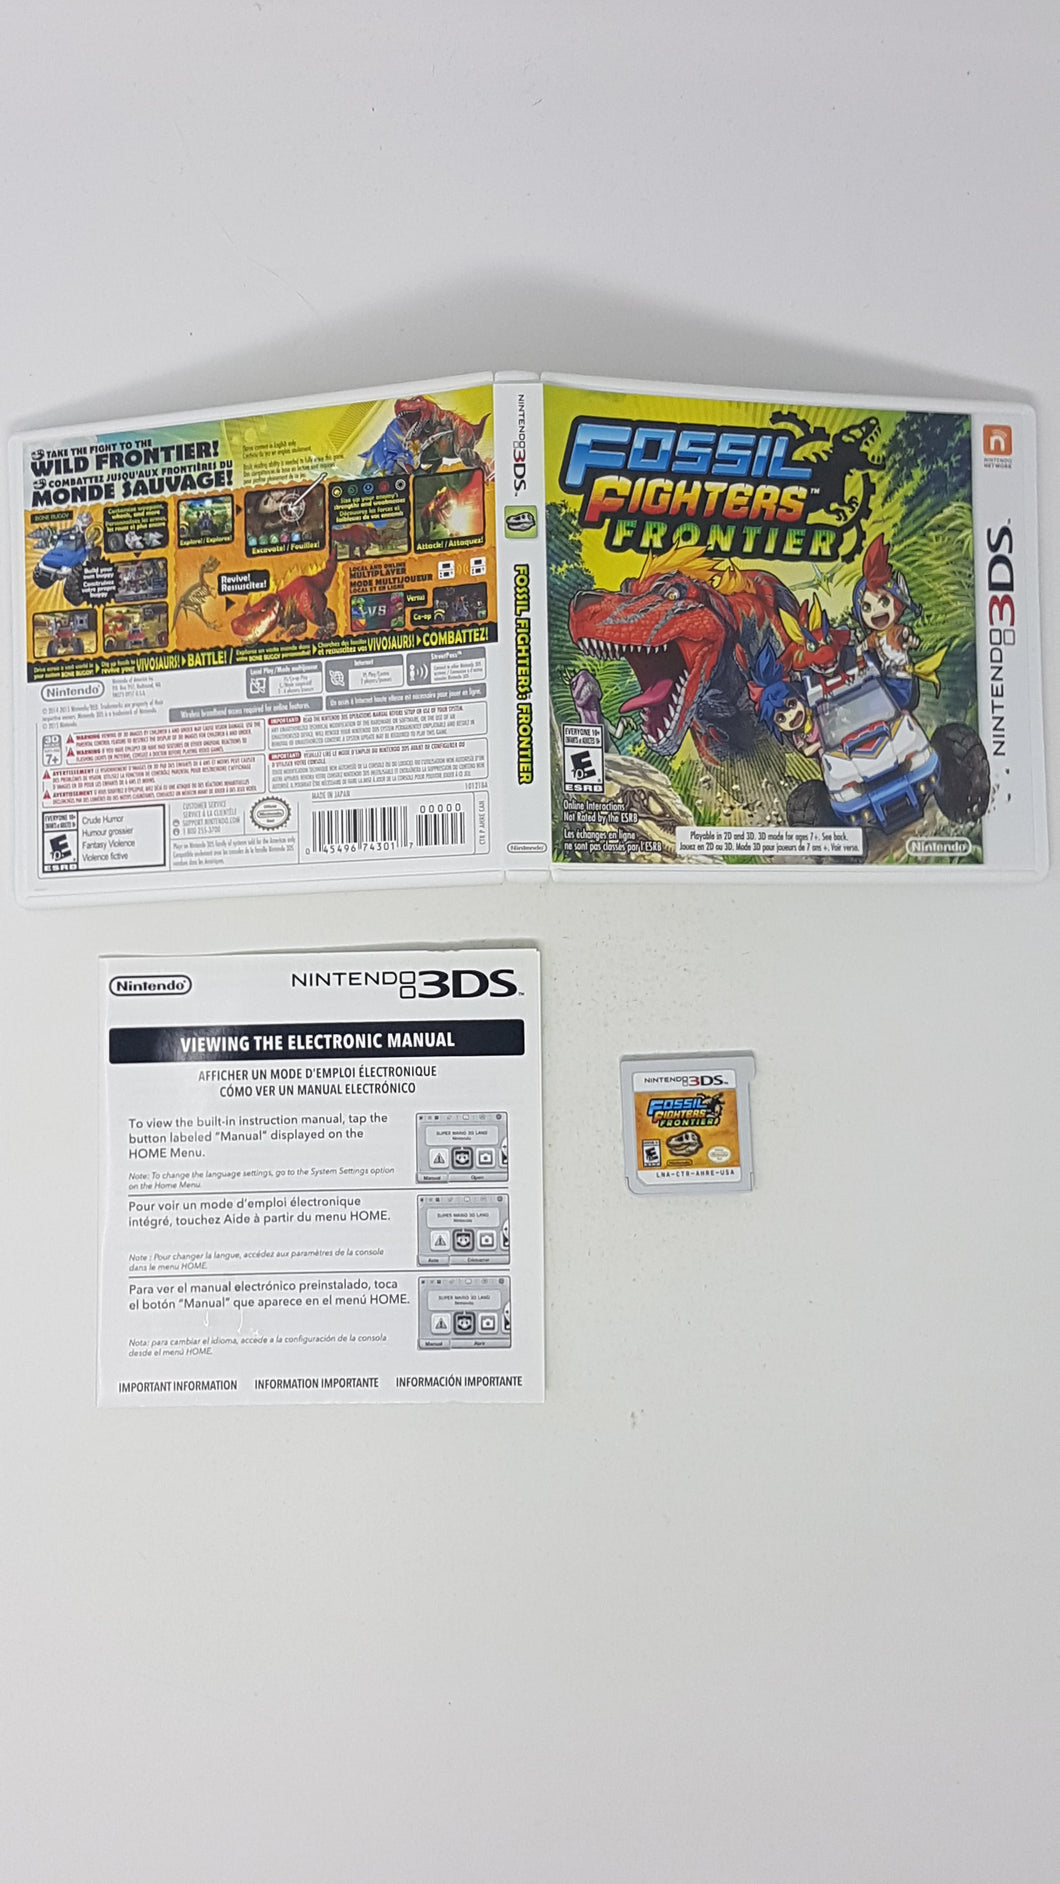 Fossil Fighters - Frontier - Nintendo 3DS